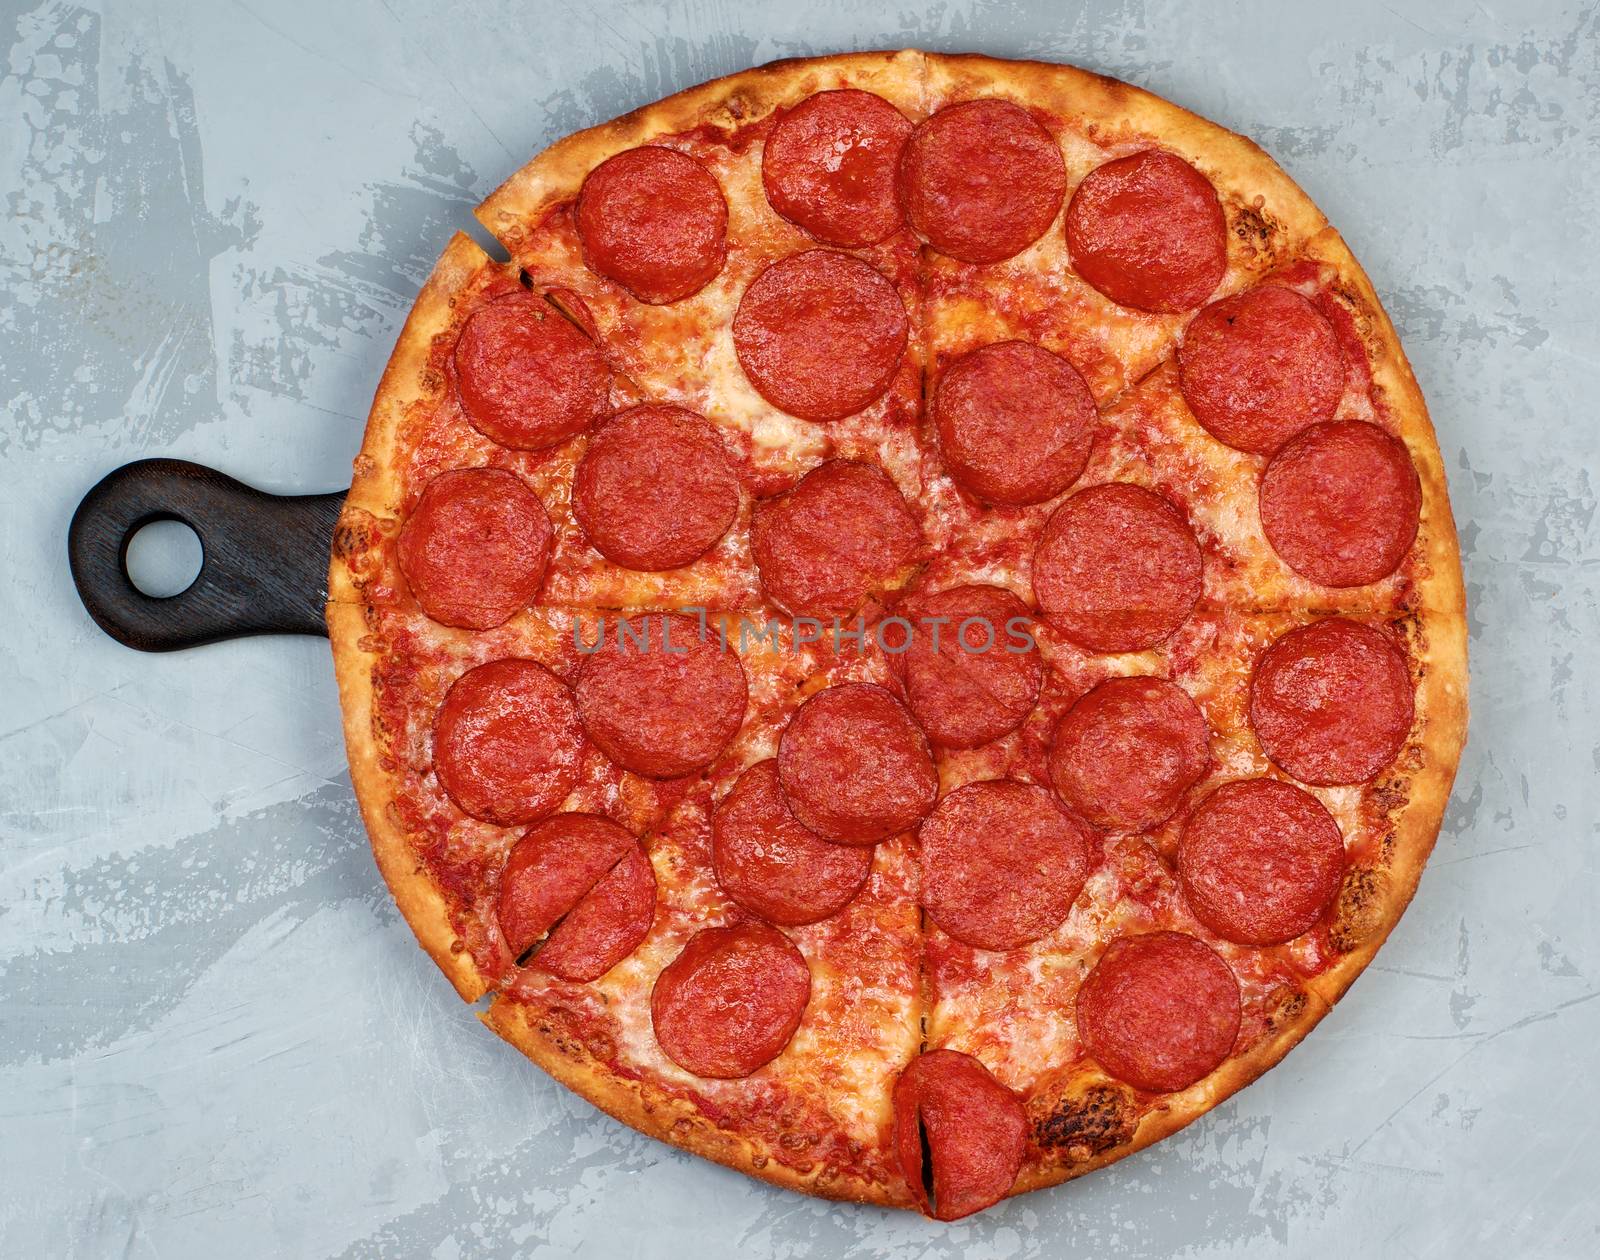 Freshly Baked Pepperoni Pizza with Tomato Sauce, Pepperoni and Cheese on Cutting Board on Grey Textured background. Top View